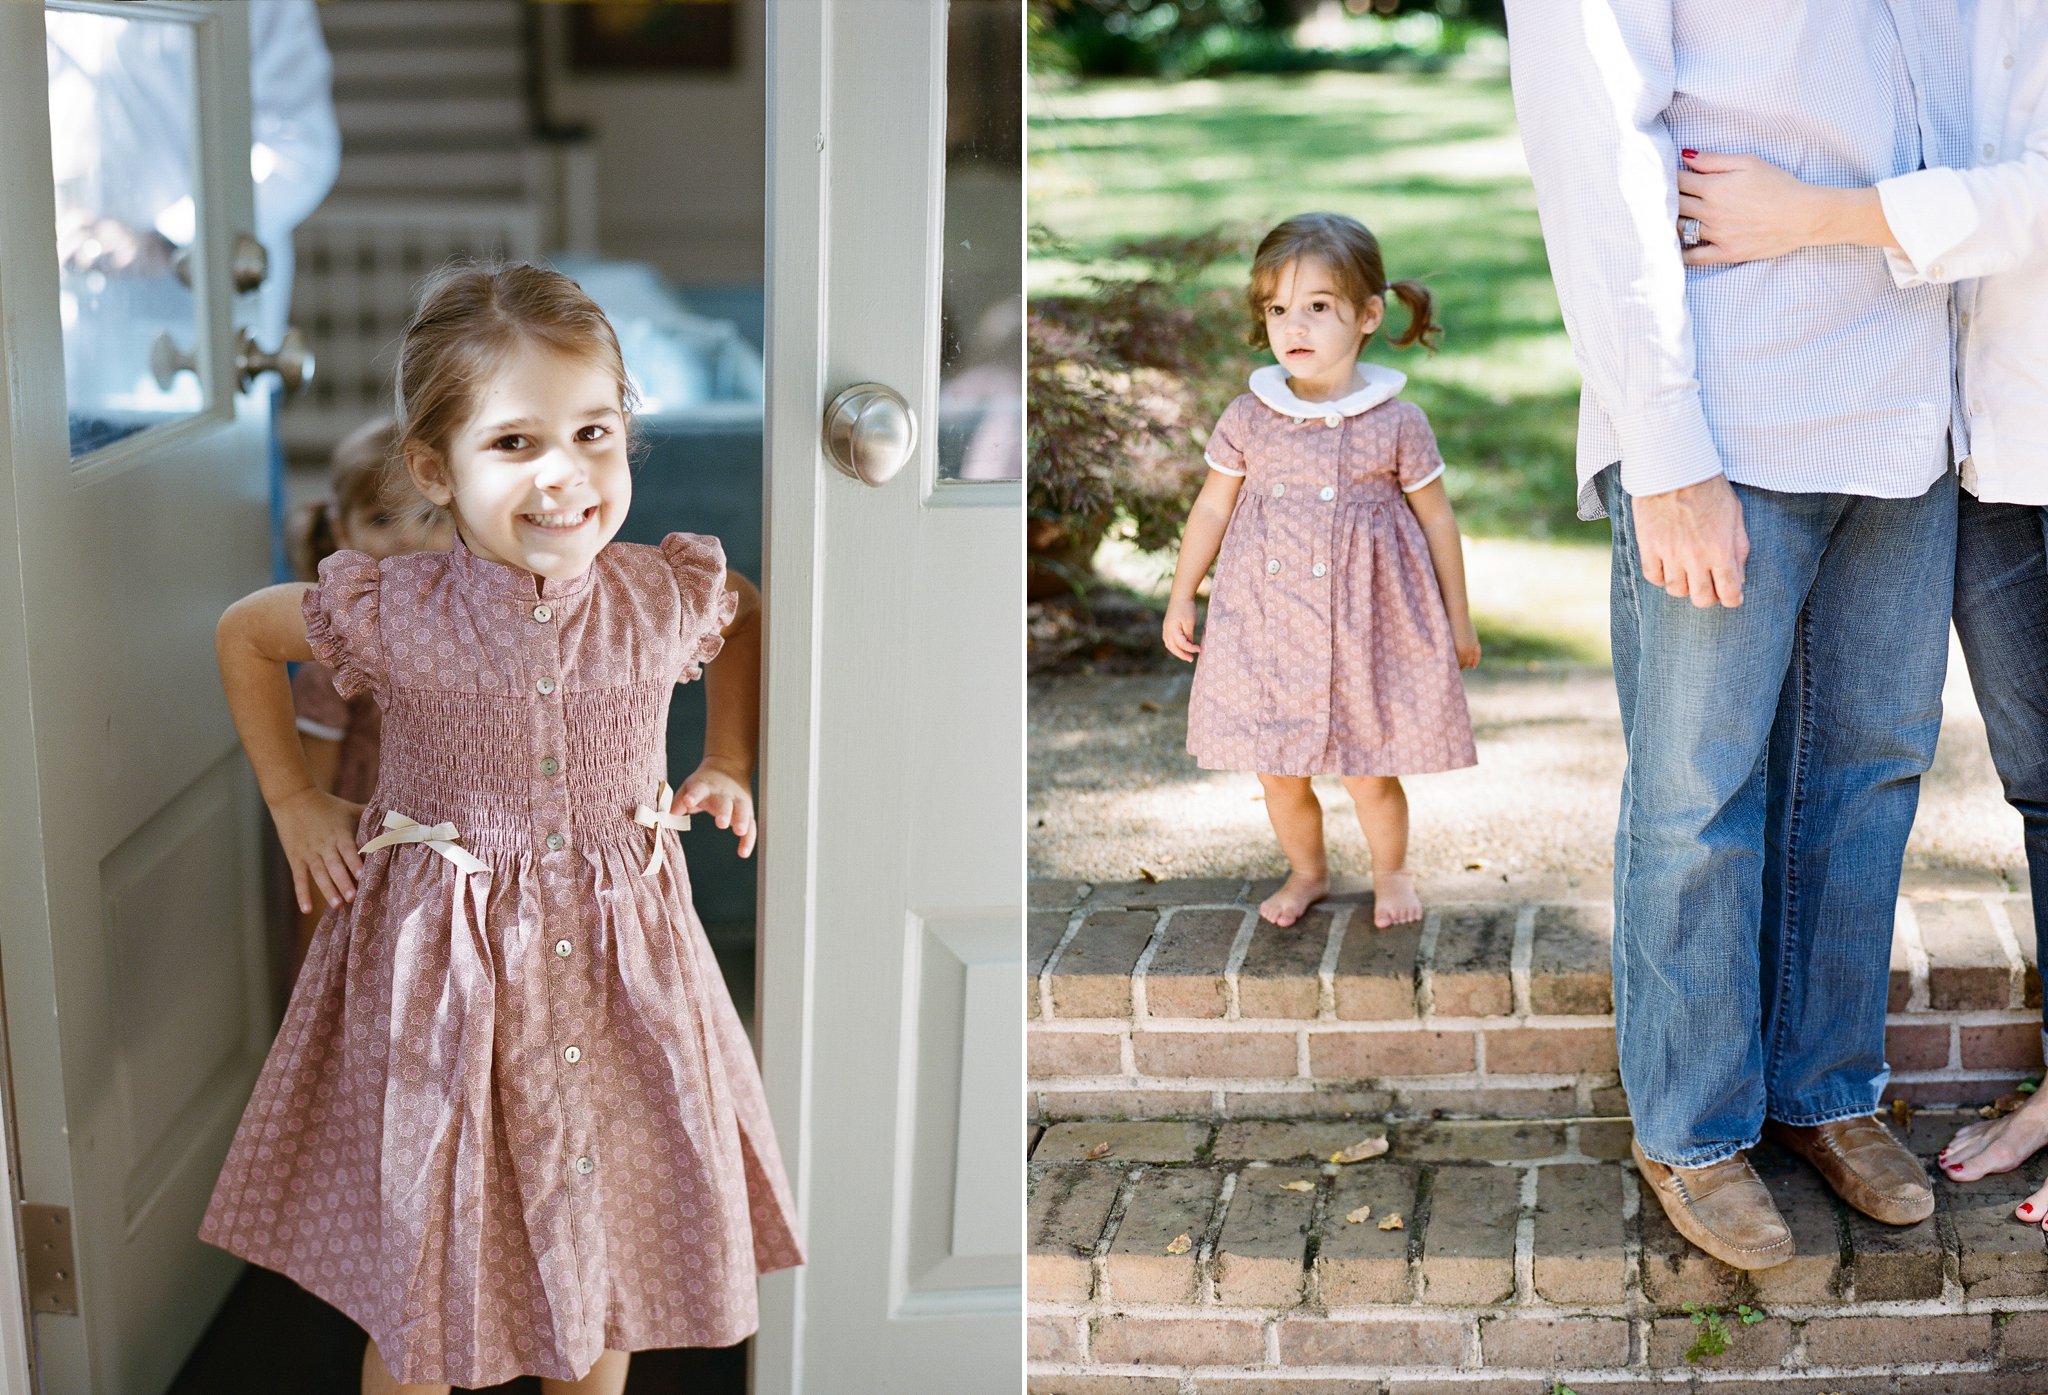 tallahassee family photographer shannon griffin photography_0045.jpg